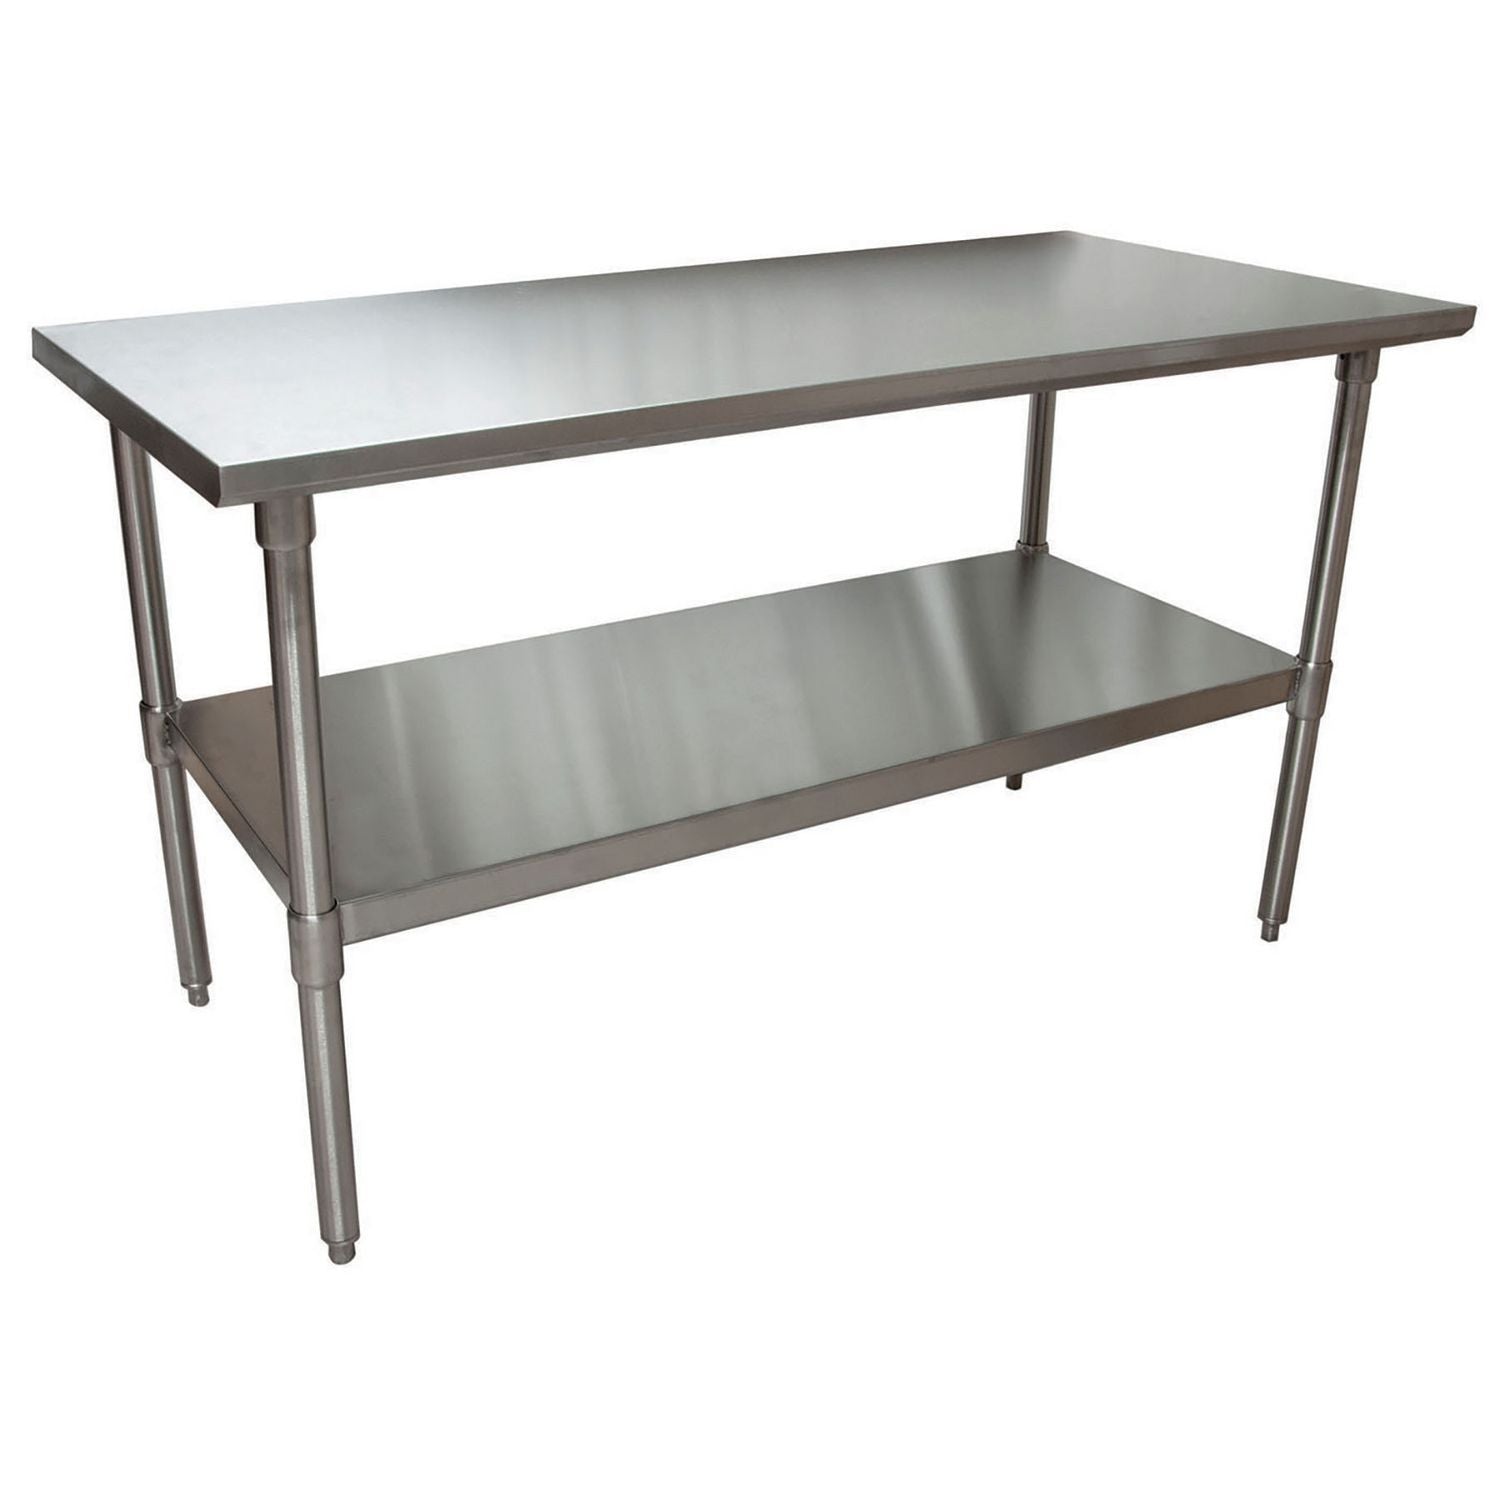 stainless-steel-flat-top-work-tables-60w-x-30d-x-36h-silver-2-pallet-ships-in-4-6-business-days_bke2vt6030 - 2